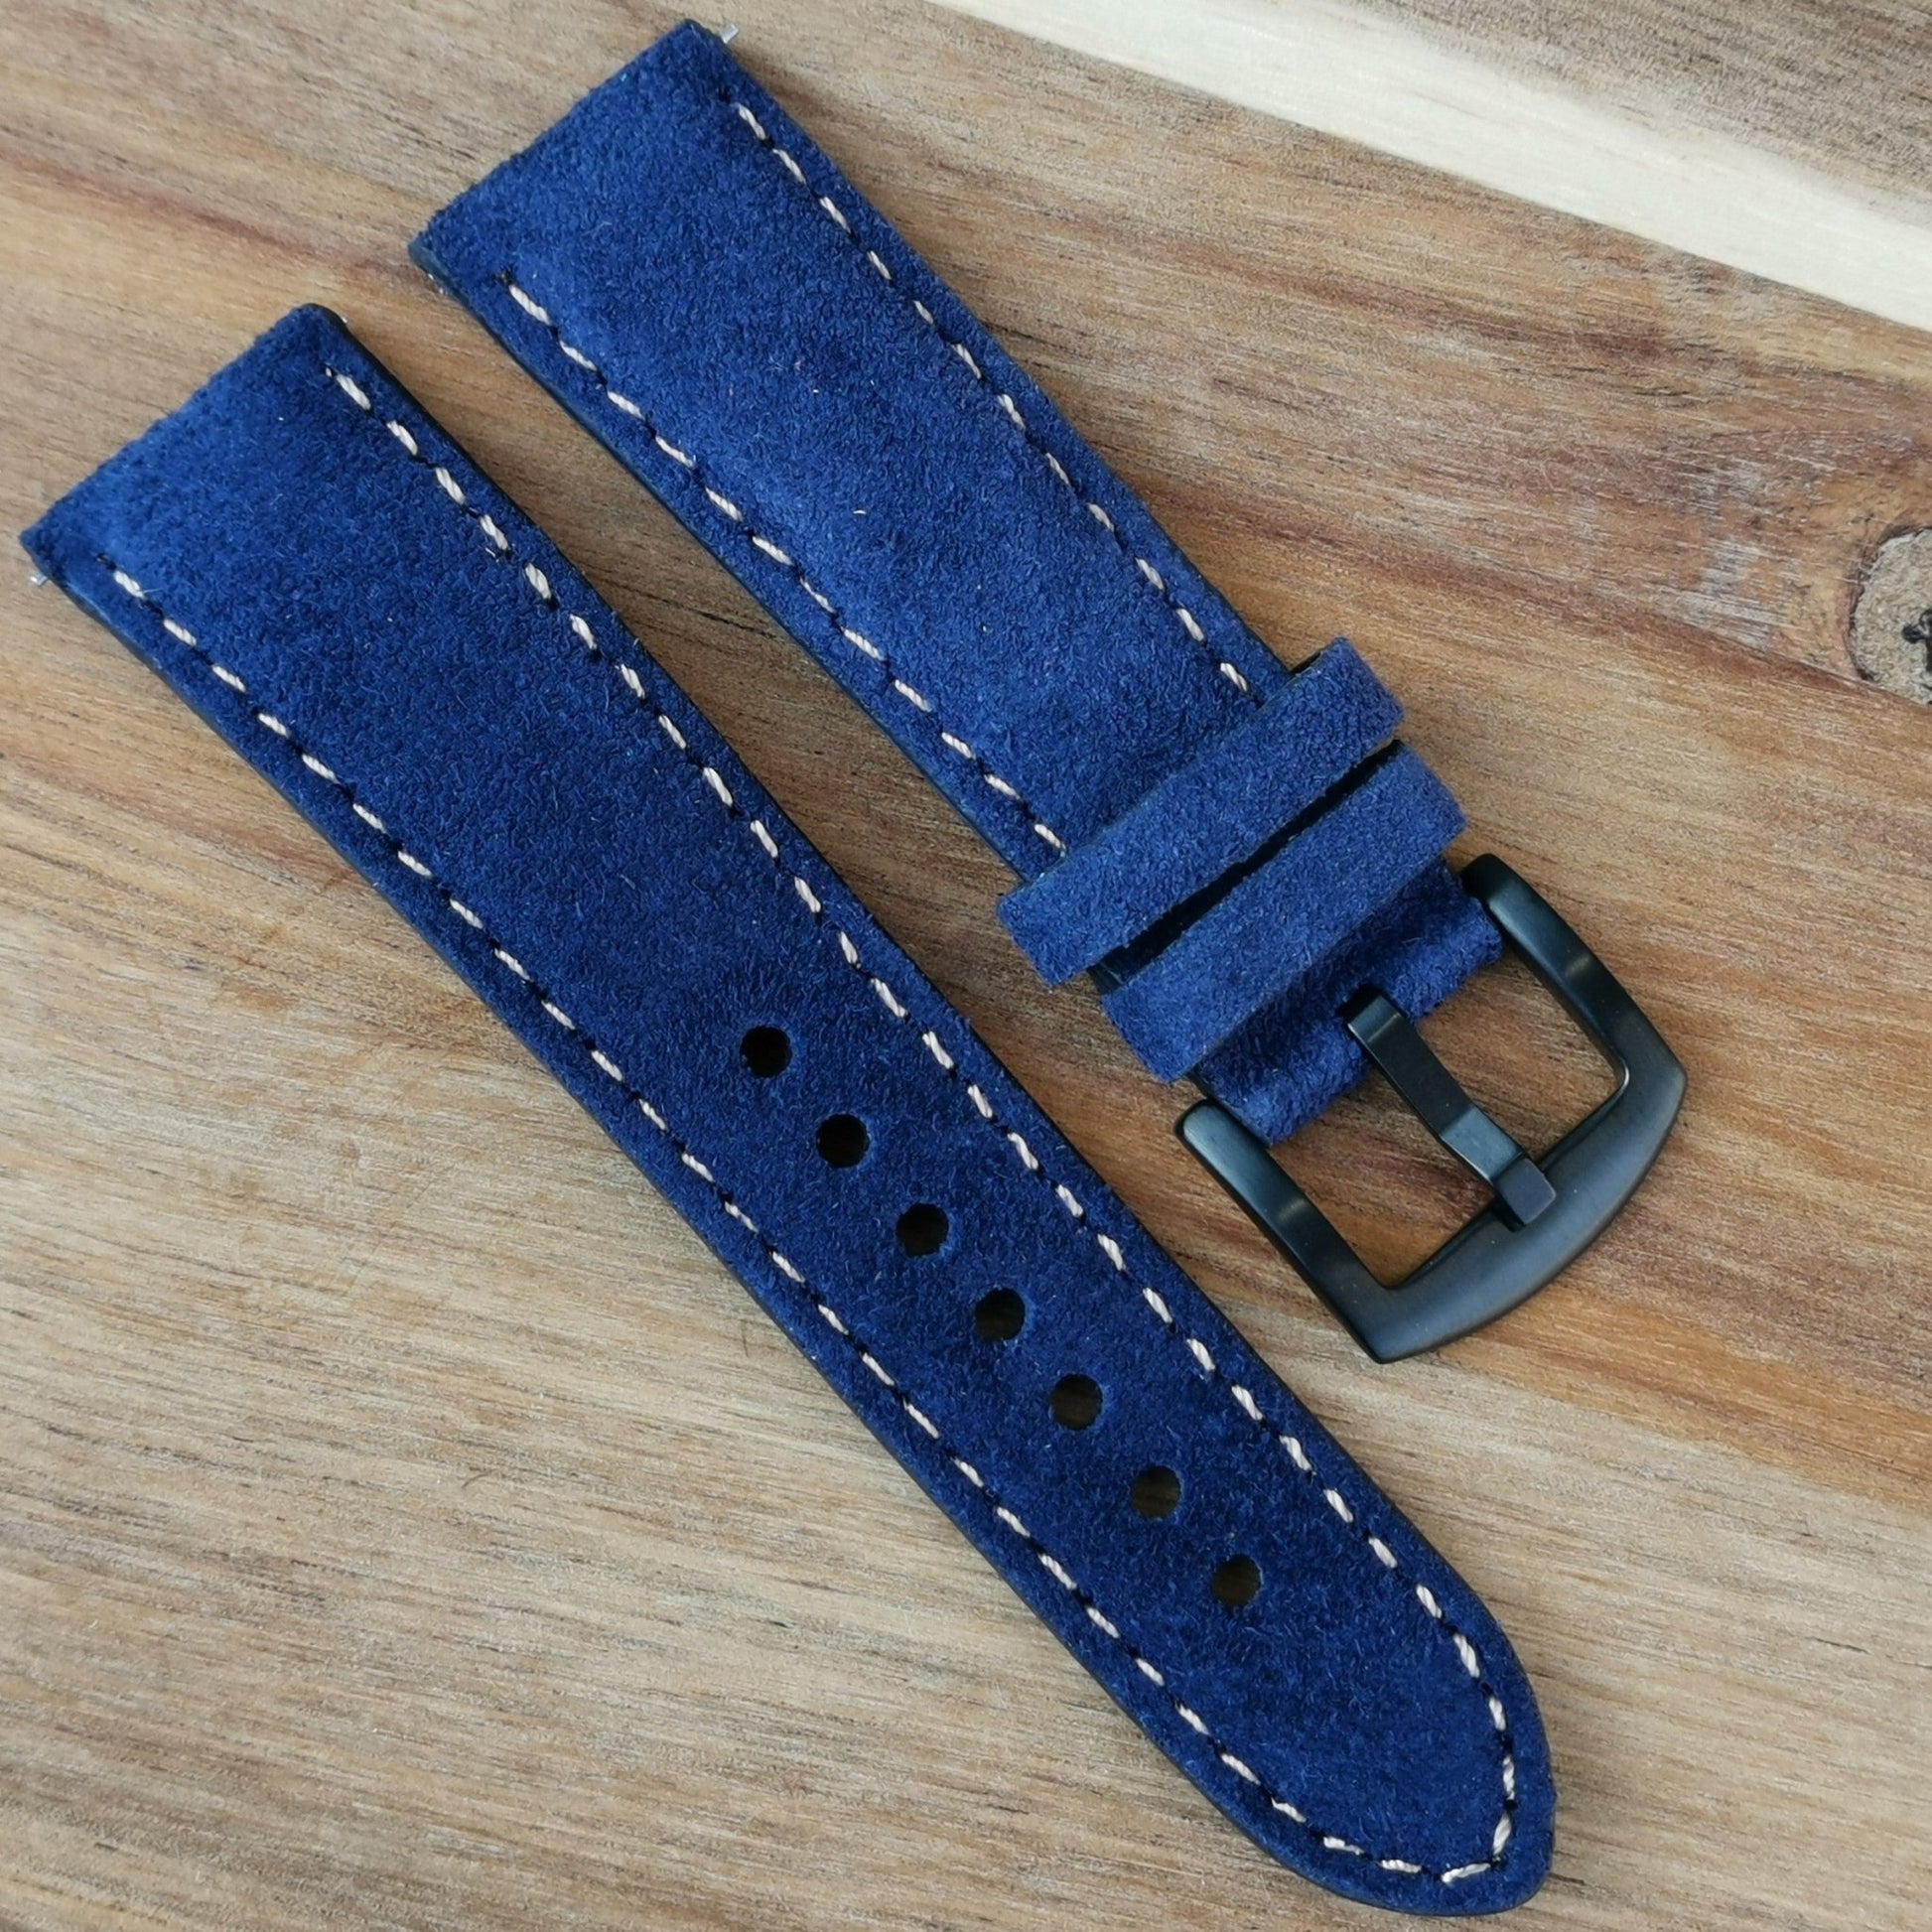 Paris navy blue suede watch strap, PVD black buckle. 18mm, 20mm, 22mm, 24mm. Watch And Strap.